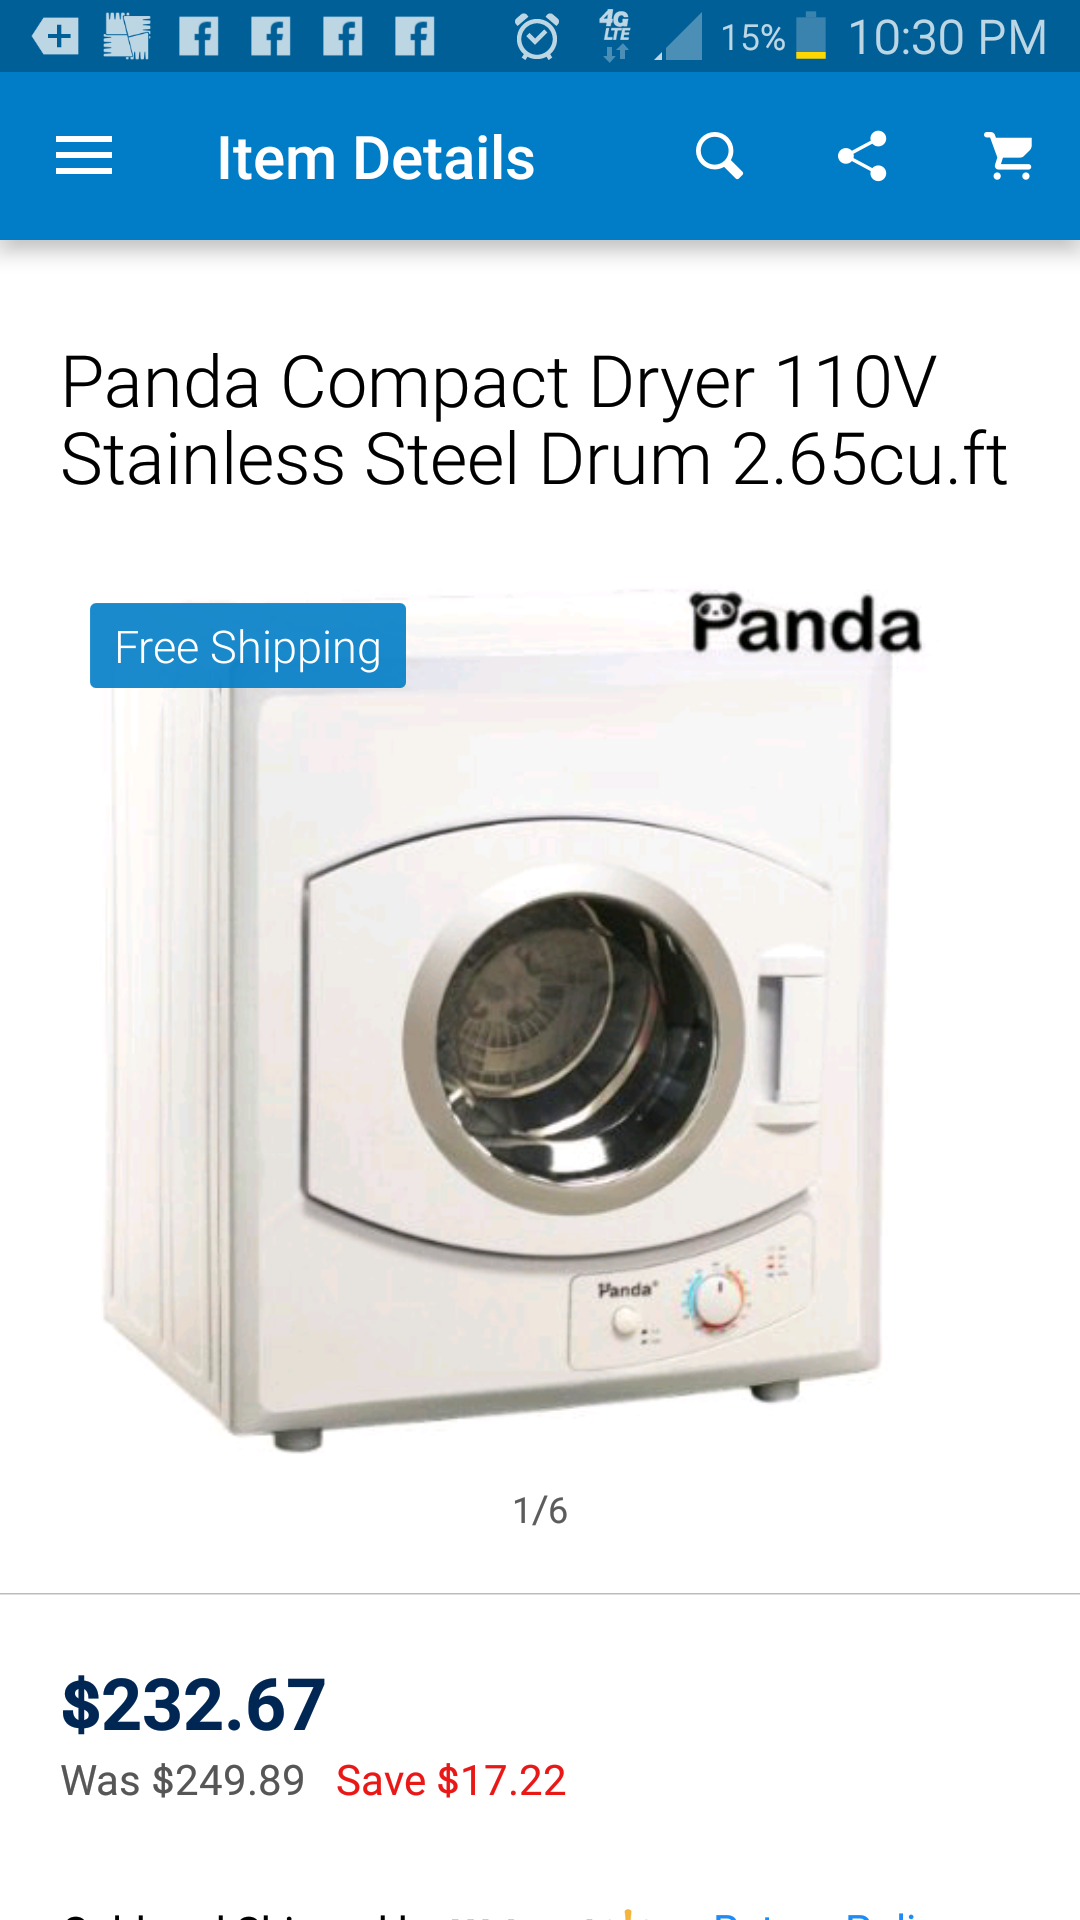 Brand new panda compact dryer perfect for small spaces